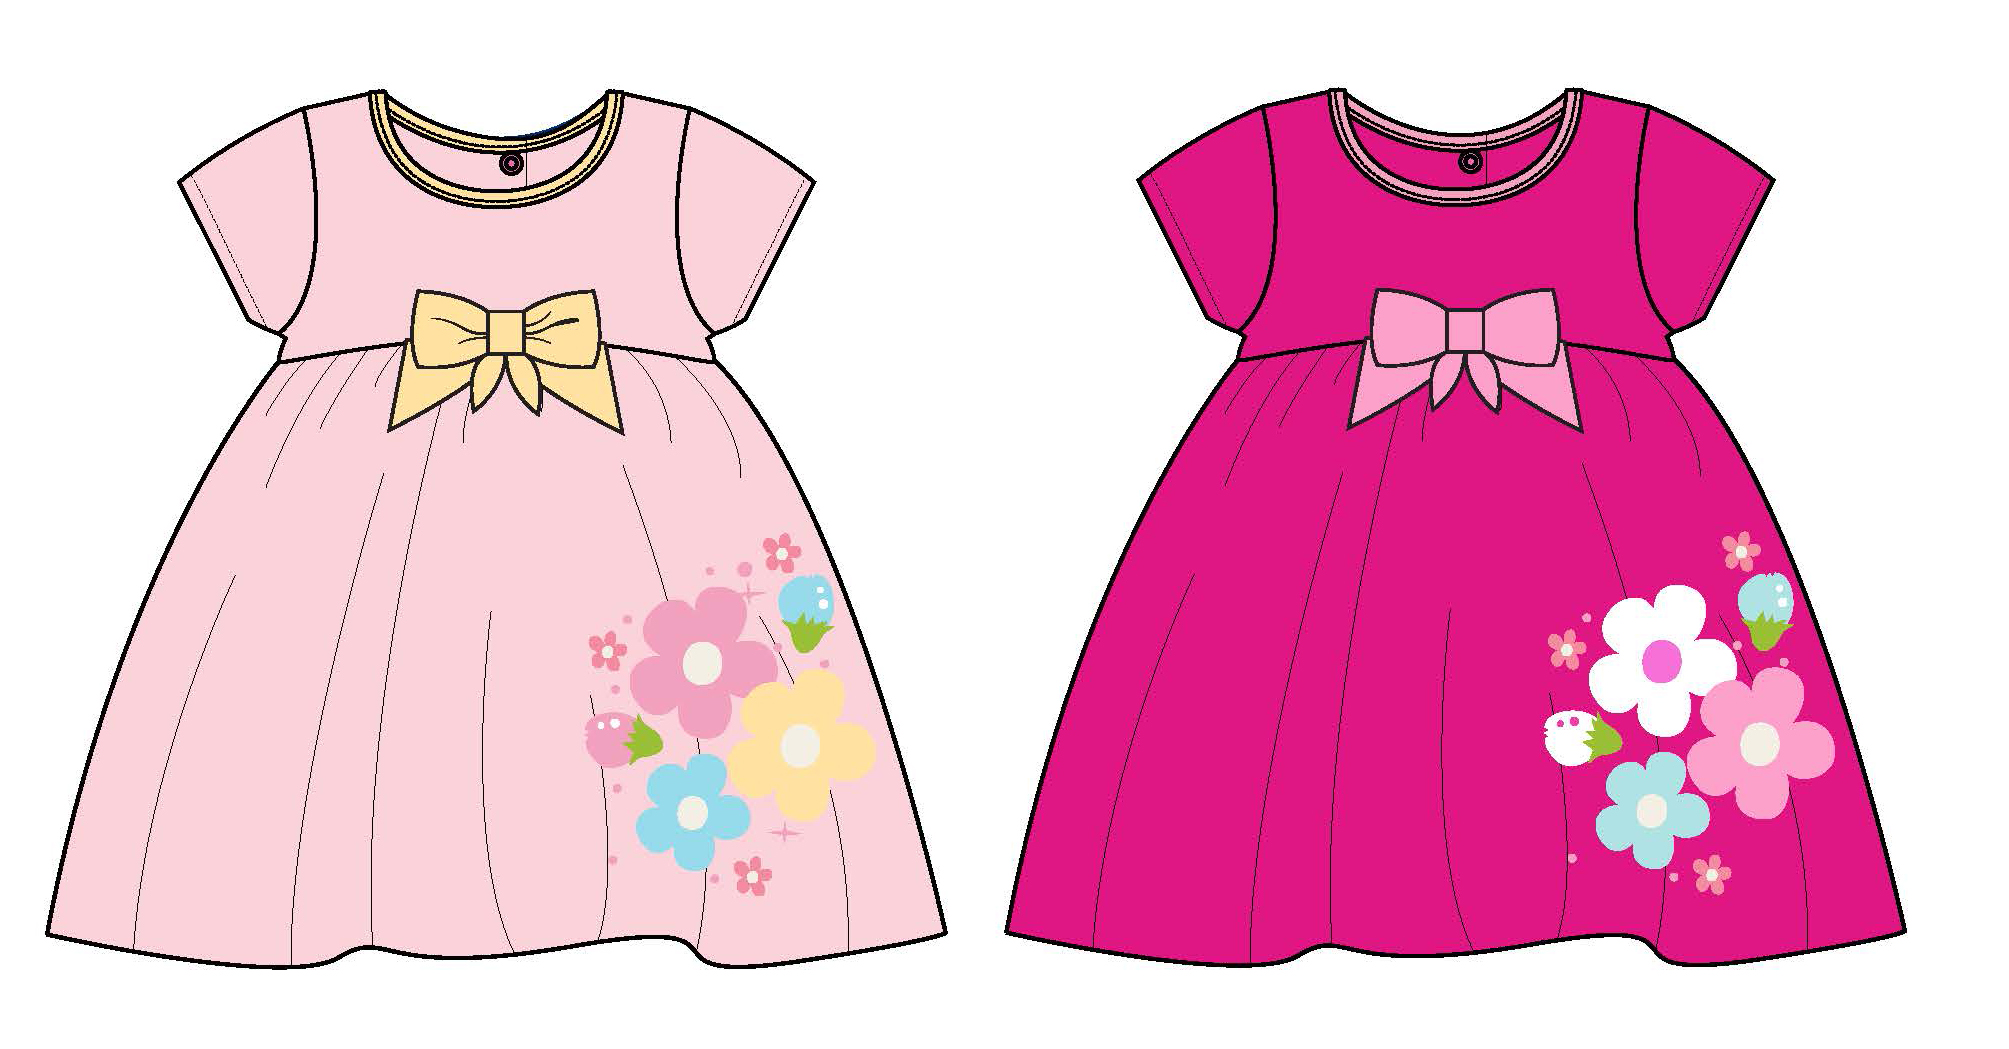 Toddler Girl's Short-Sleeve Knit DRESS w/ Ribbon Bow Embellishment - Floral Print - Size 2T-4T